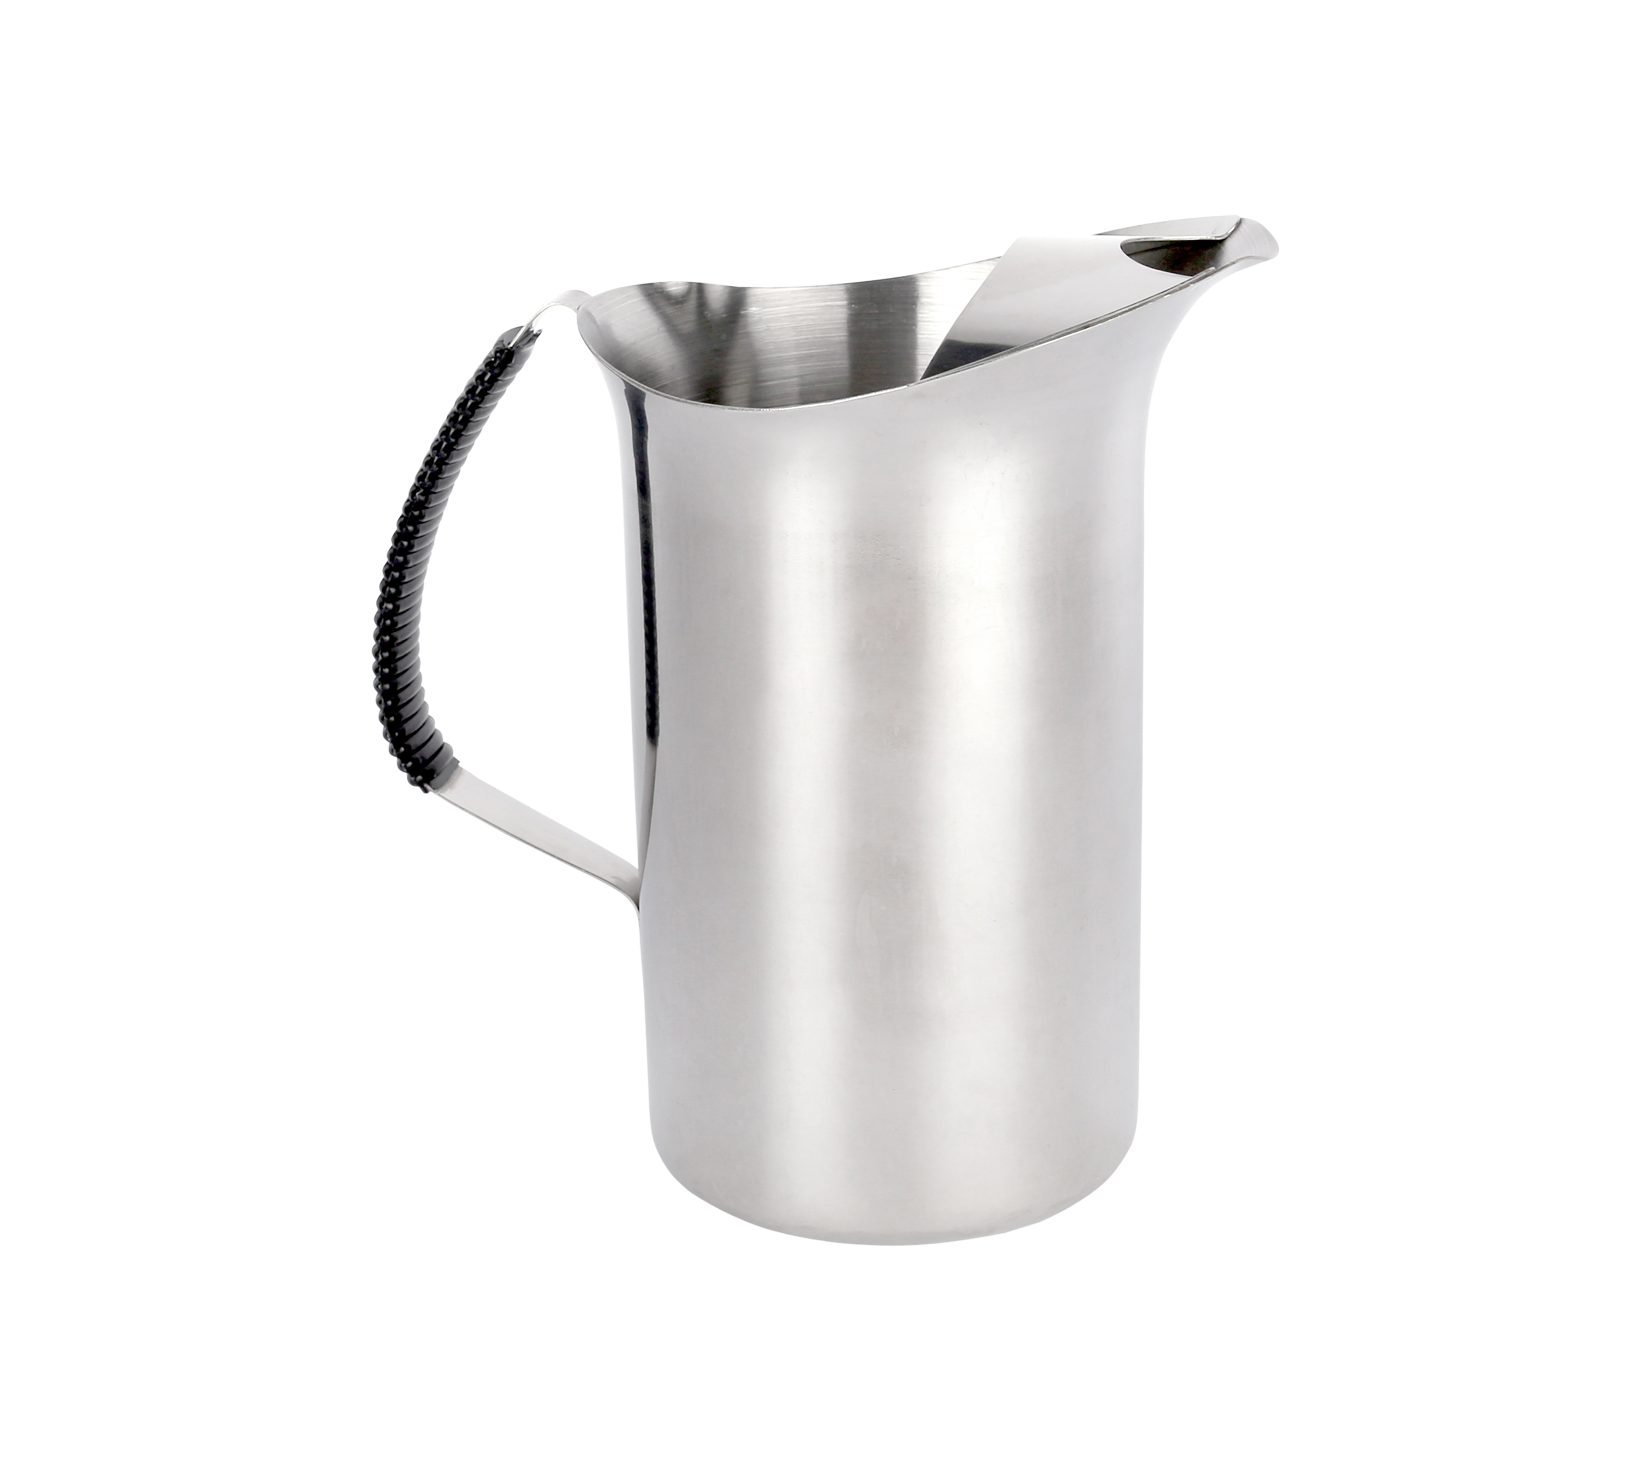 Party Rental Products Stainless Thermos - 3 gallon Coffee